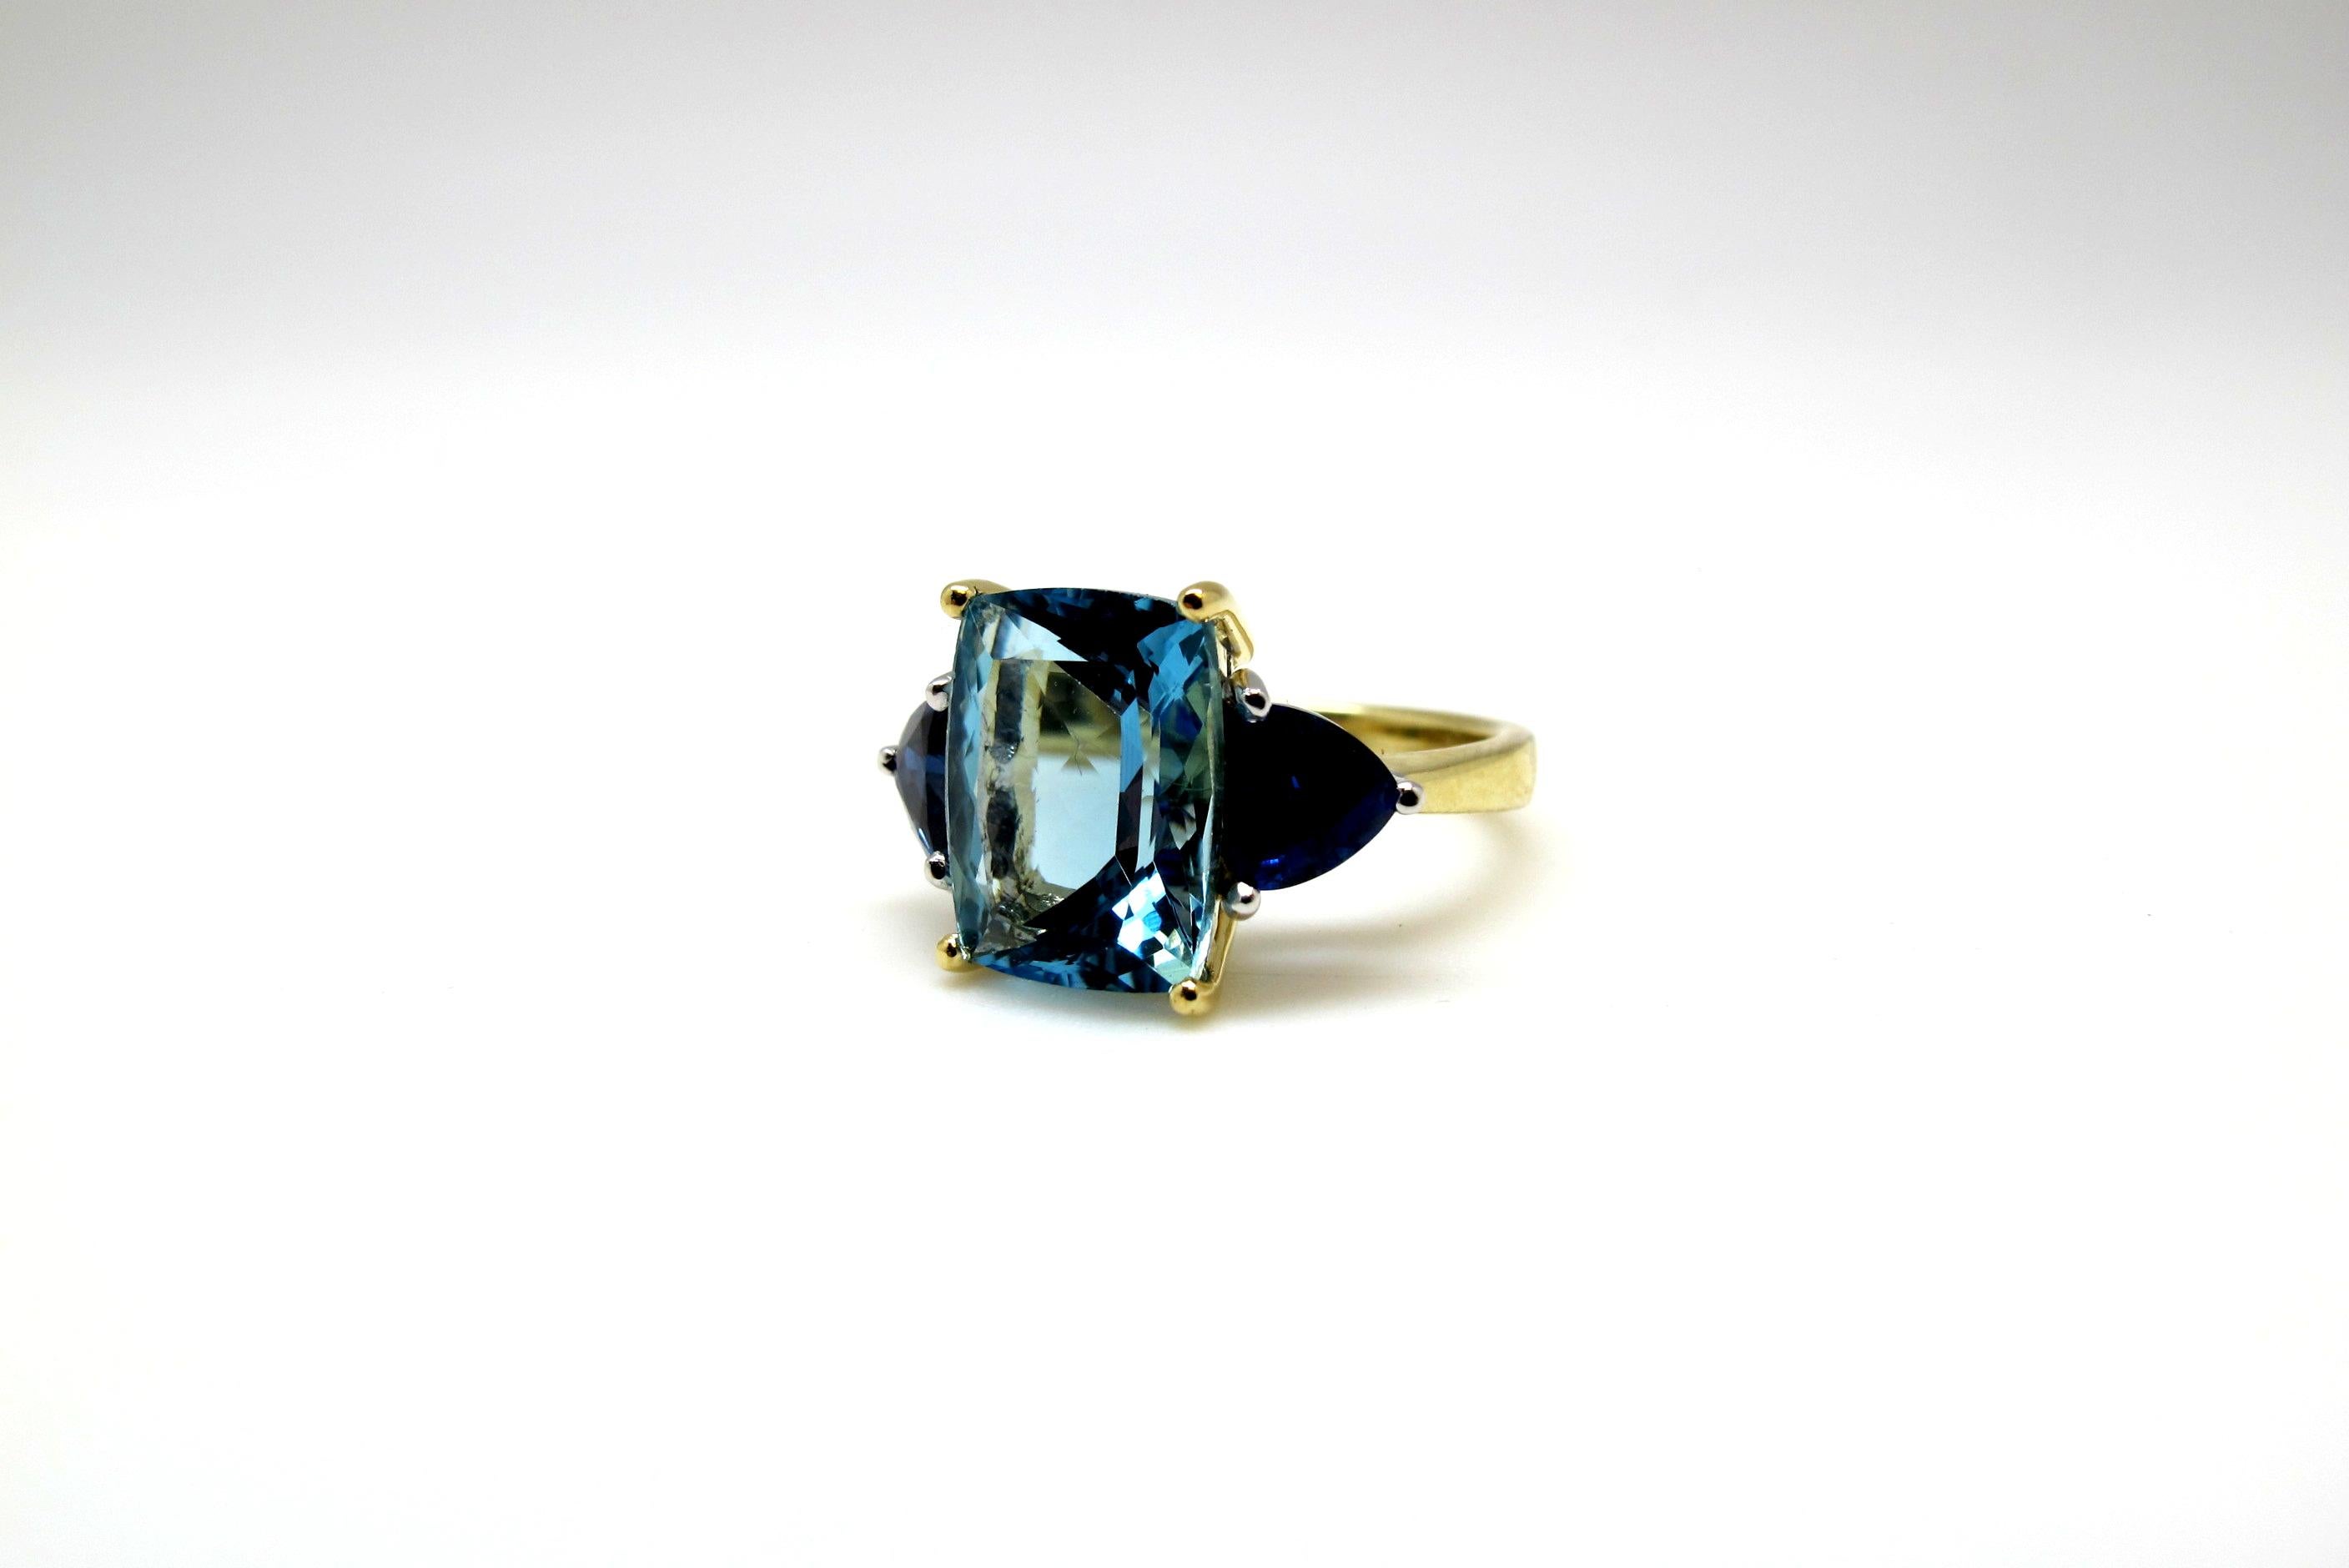 This ring is an exquisite combination of color, size and design. We have combined gem quality, richly colored aquamarine and velvety, royal blue sapphires to create a beautiful color pairing of blue on blue. The gemstones are of superior color,